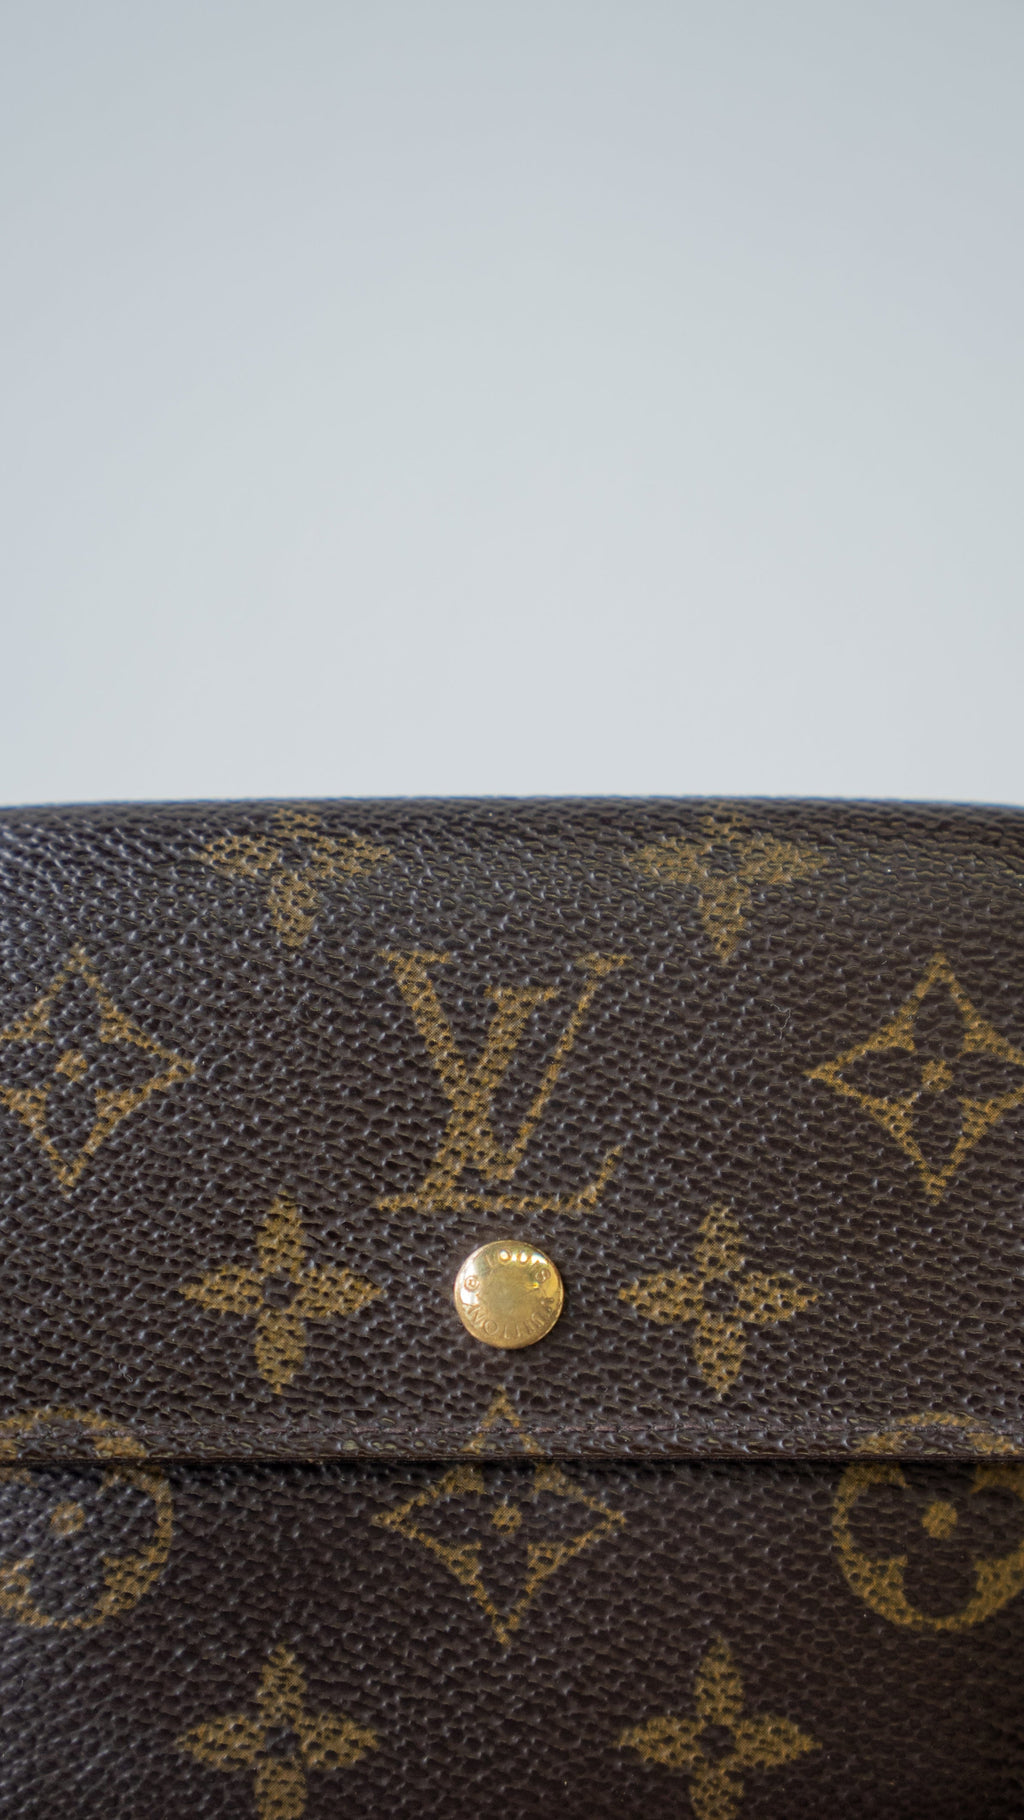 Louis VUITTON Wallet Elise in monogrammed leather, br…